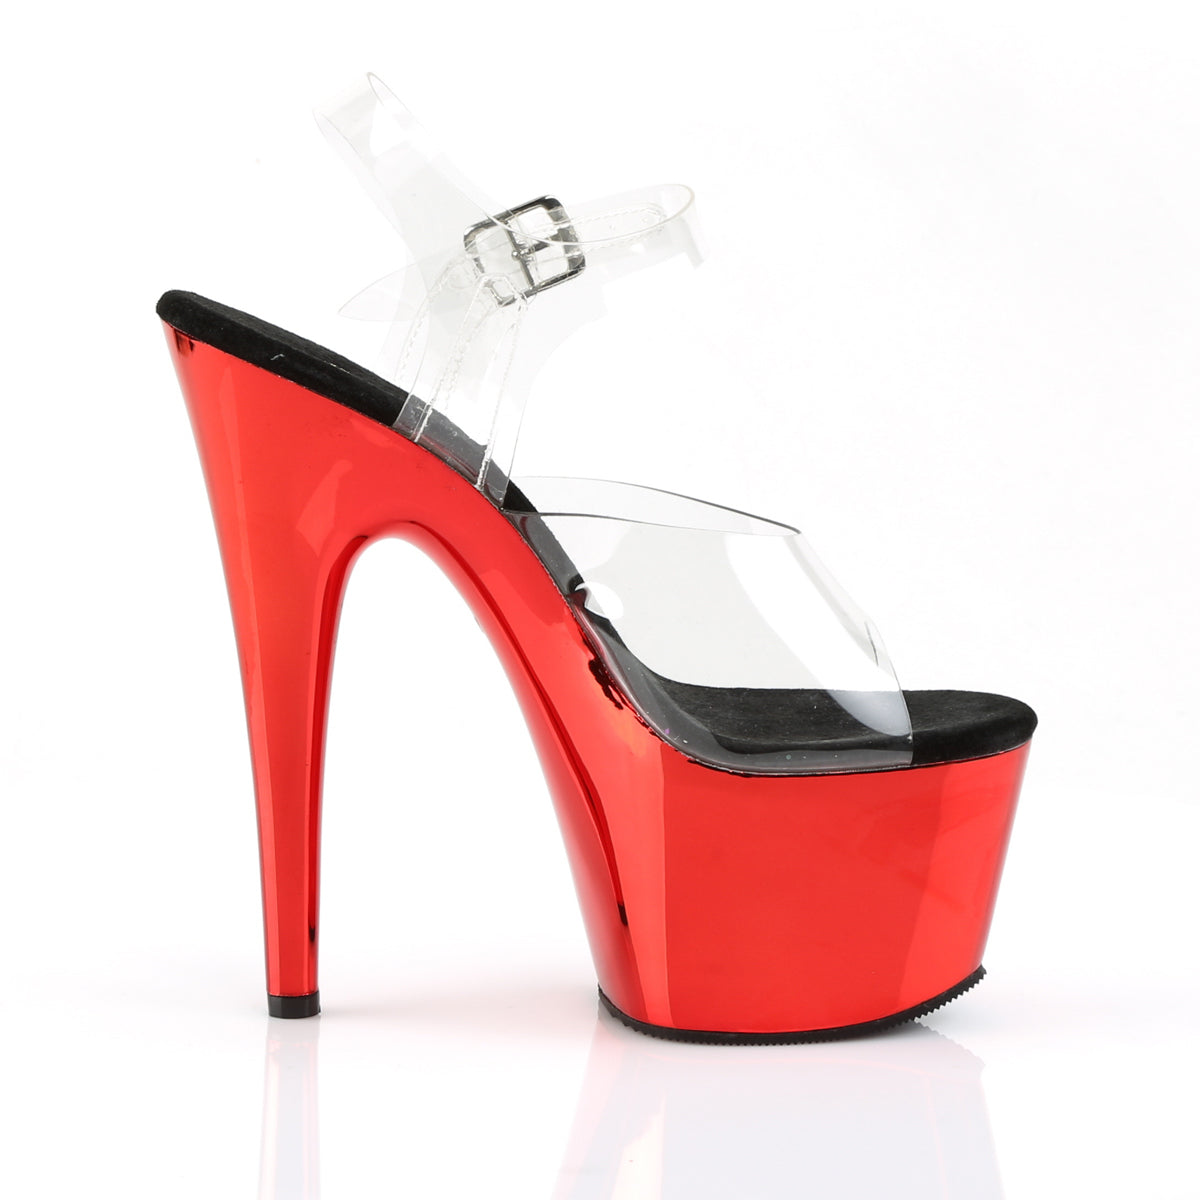 ADORE-708 7" Heel Clear and Red Chrome Dancers shoes